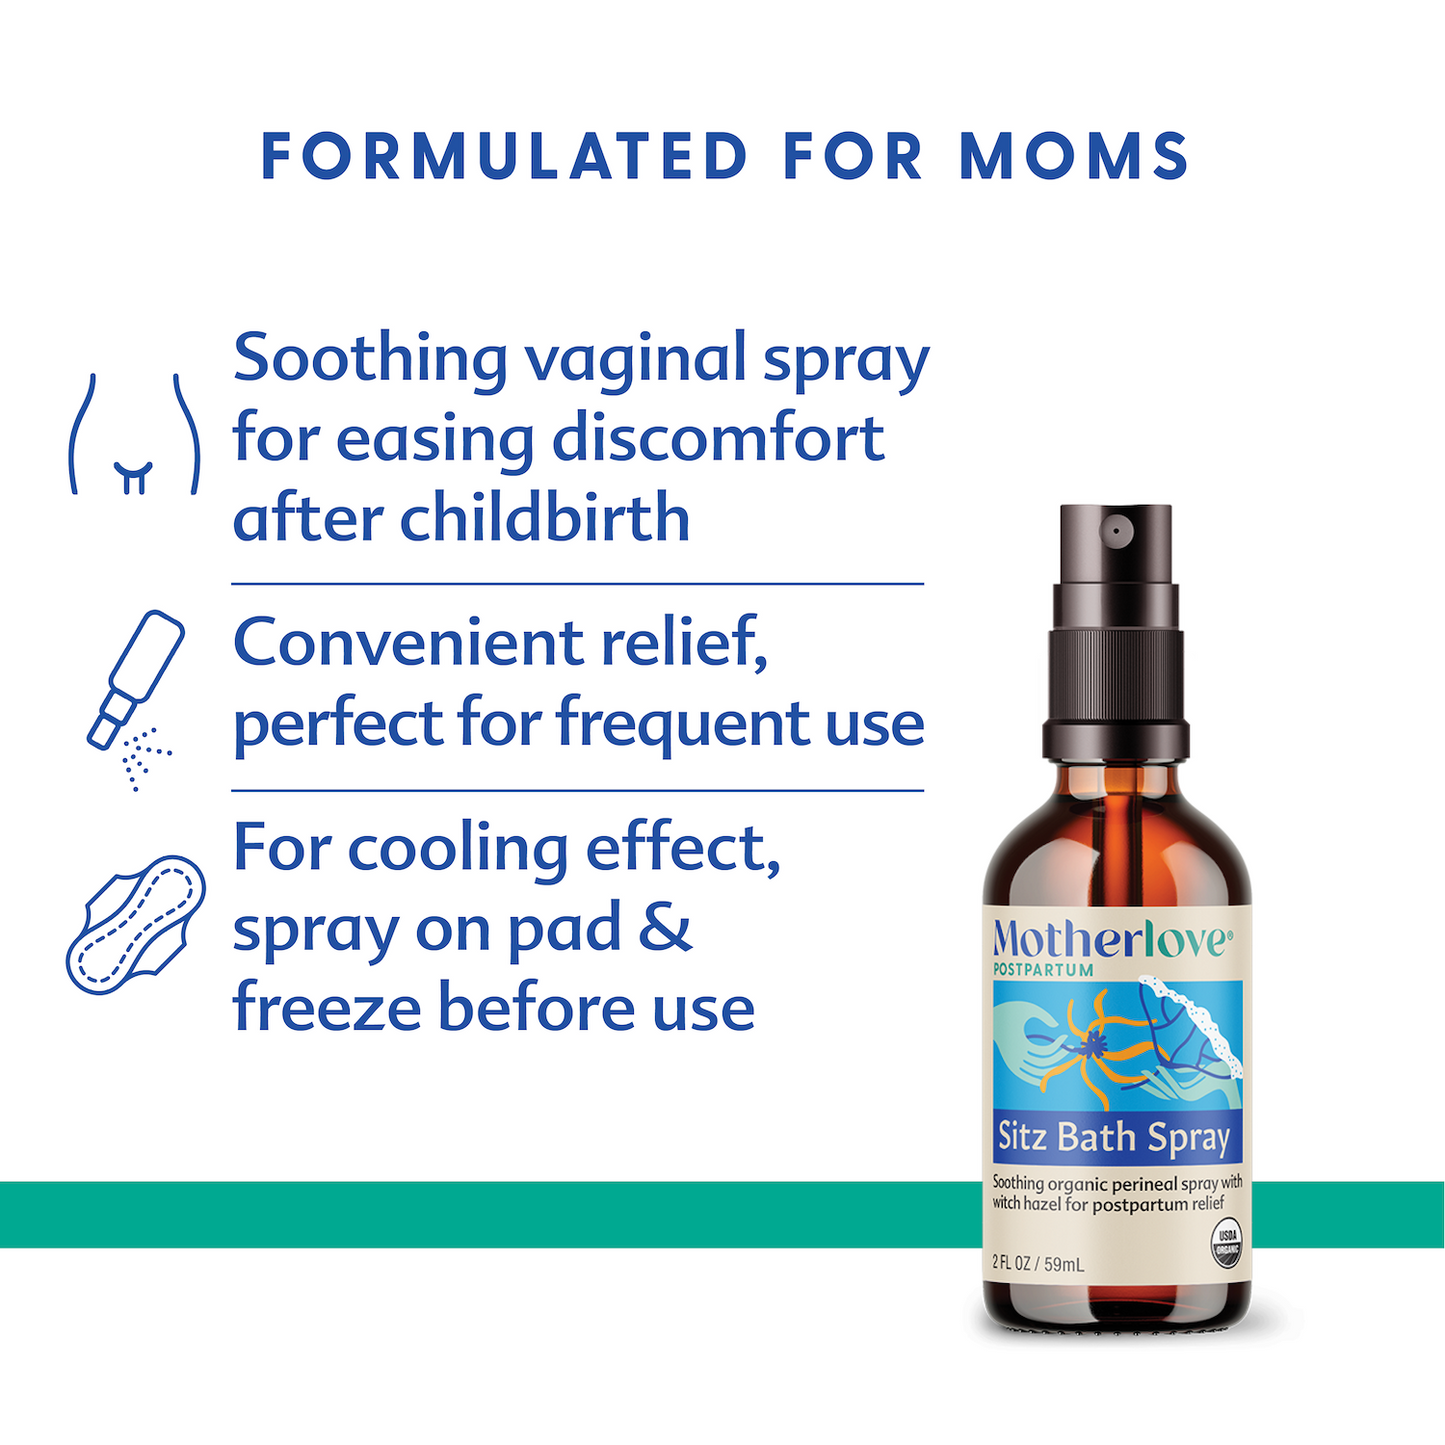 image of a bottle of motherlove sitz bath spray that states formulated for moms by soothing vaginal spray for easing discomfort after childbirth, convenient relief, perfect for frequent use, for cooling effect, spray on pad and freeze before use